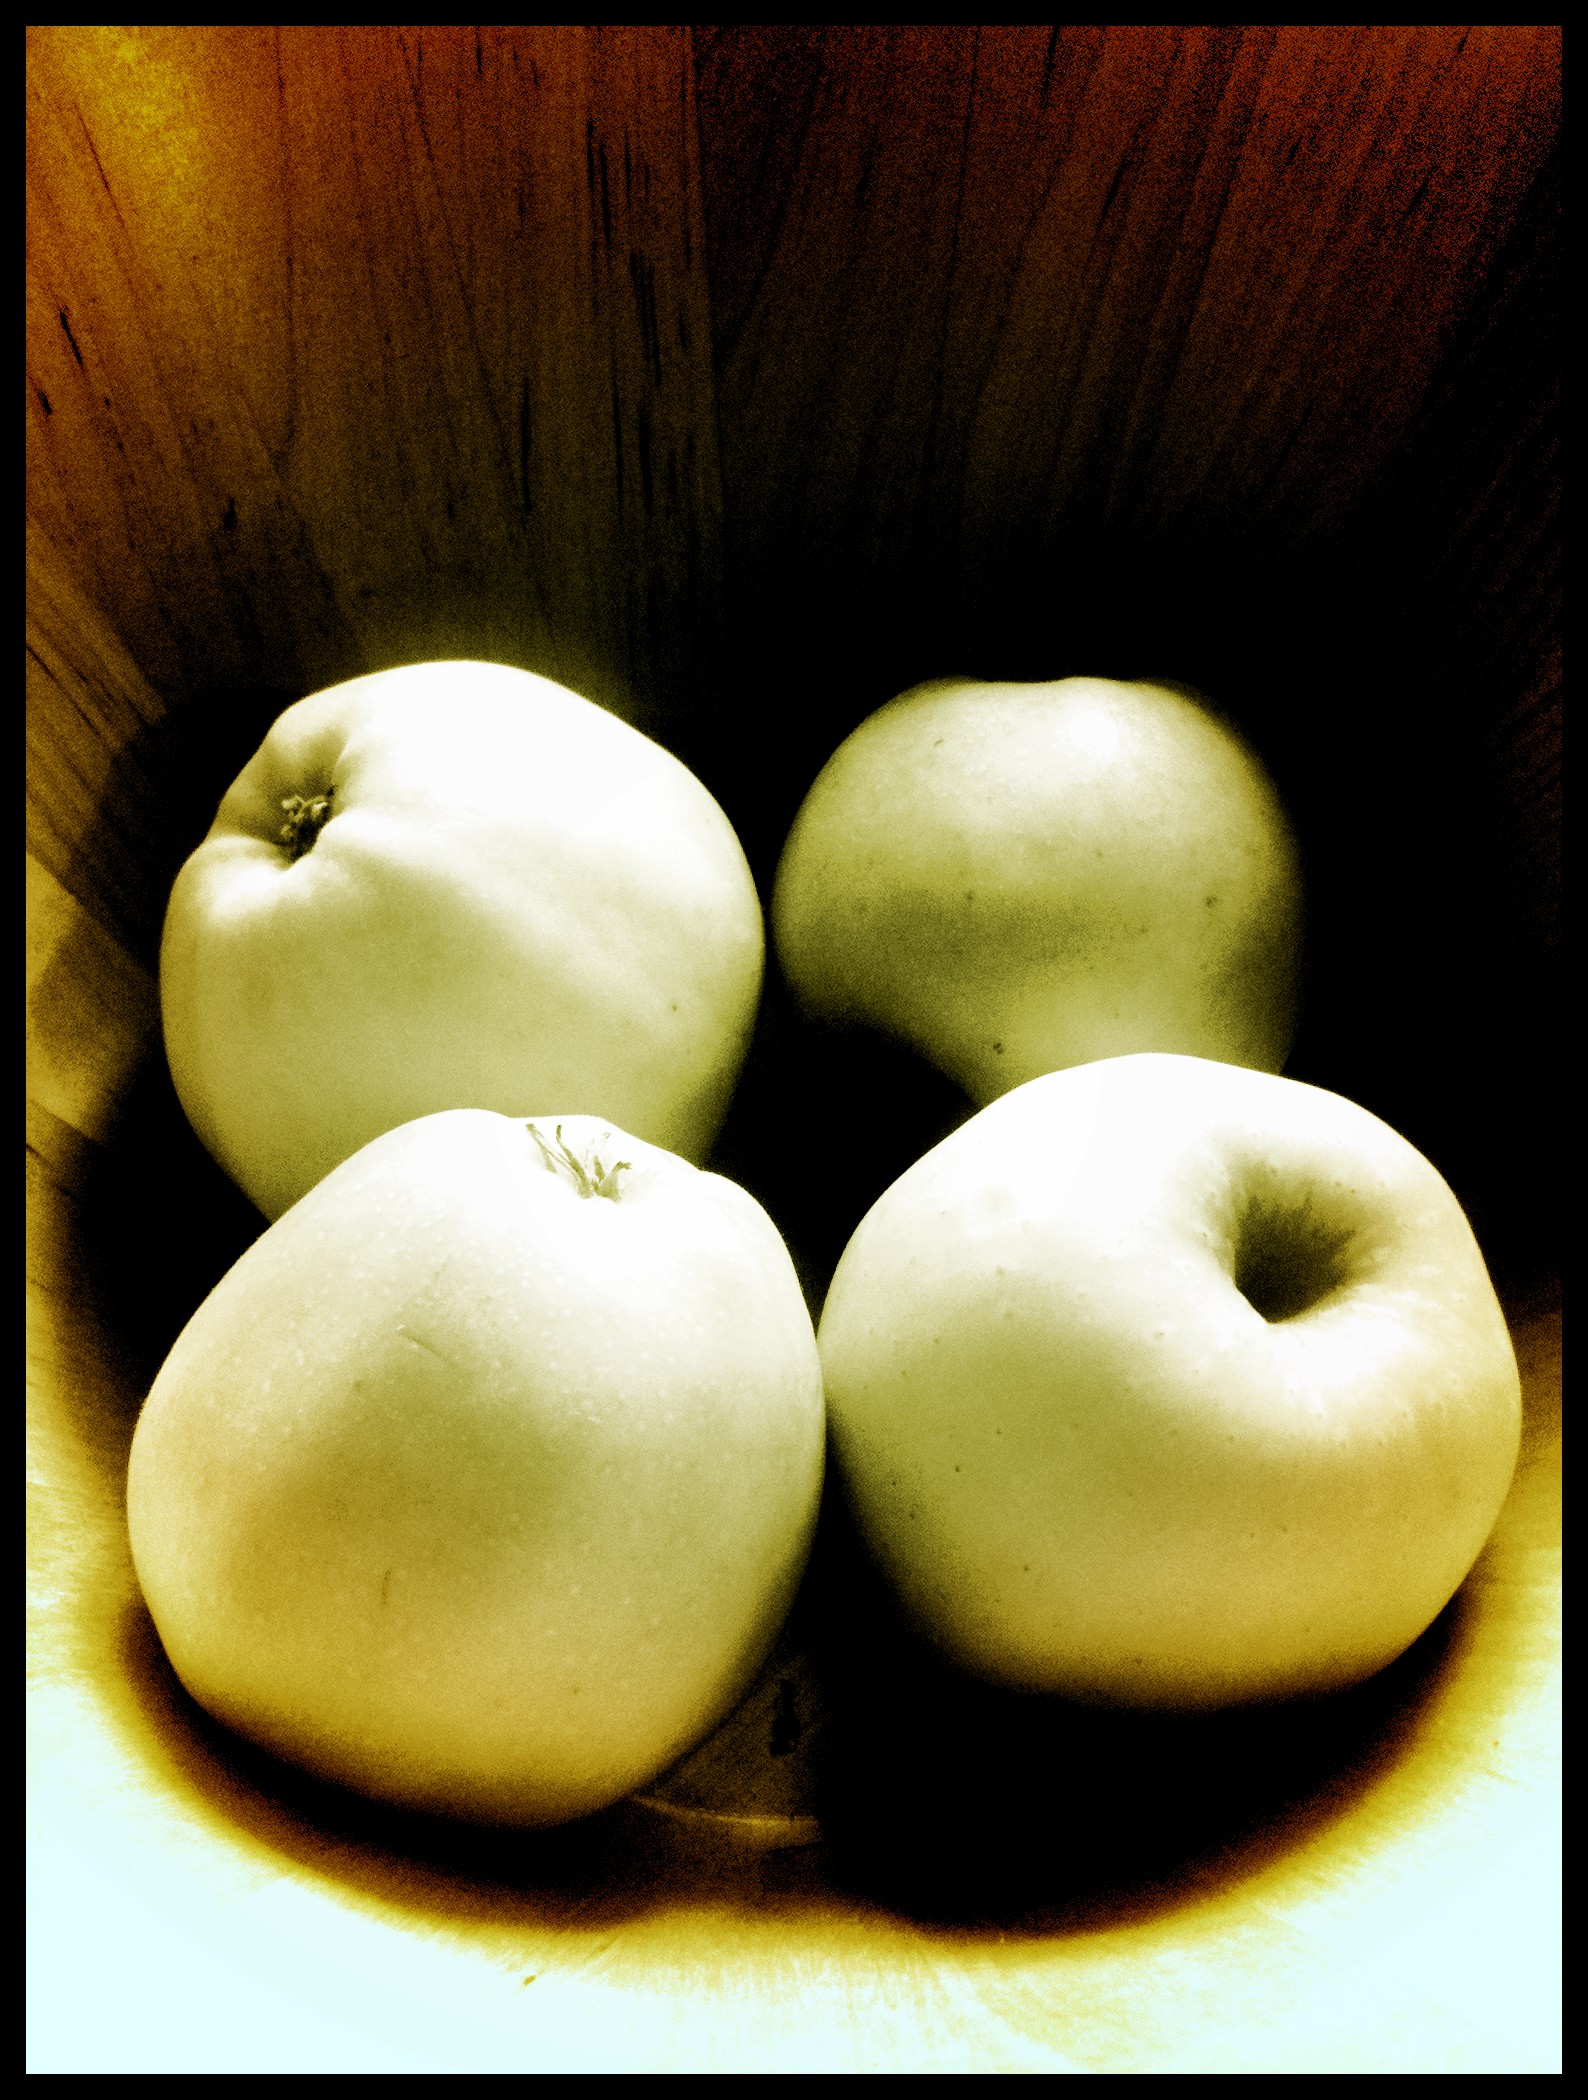 there are four apples sitting in a bowl